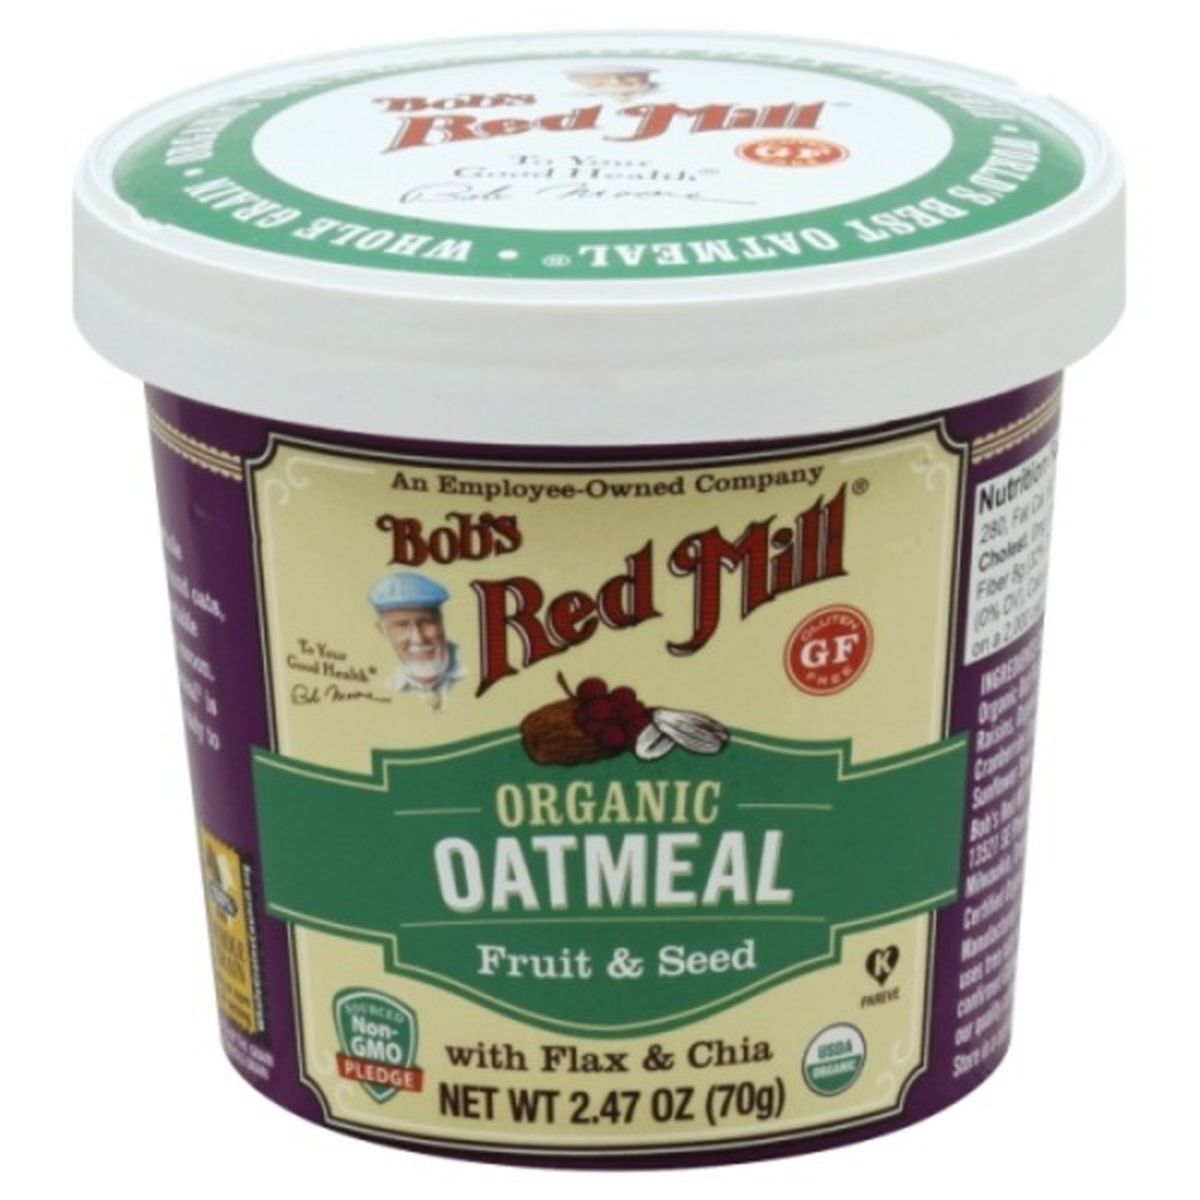 Calories in Bob's Red Mill Oatmeal, Organic, Fruit & Seed